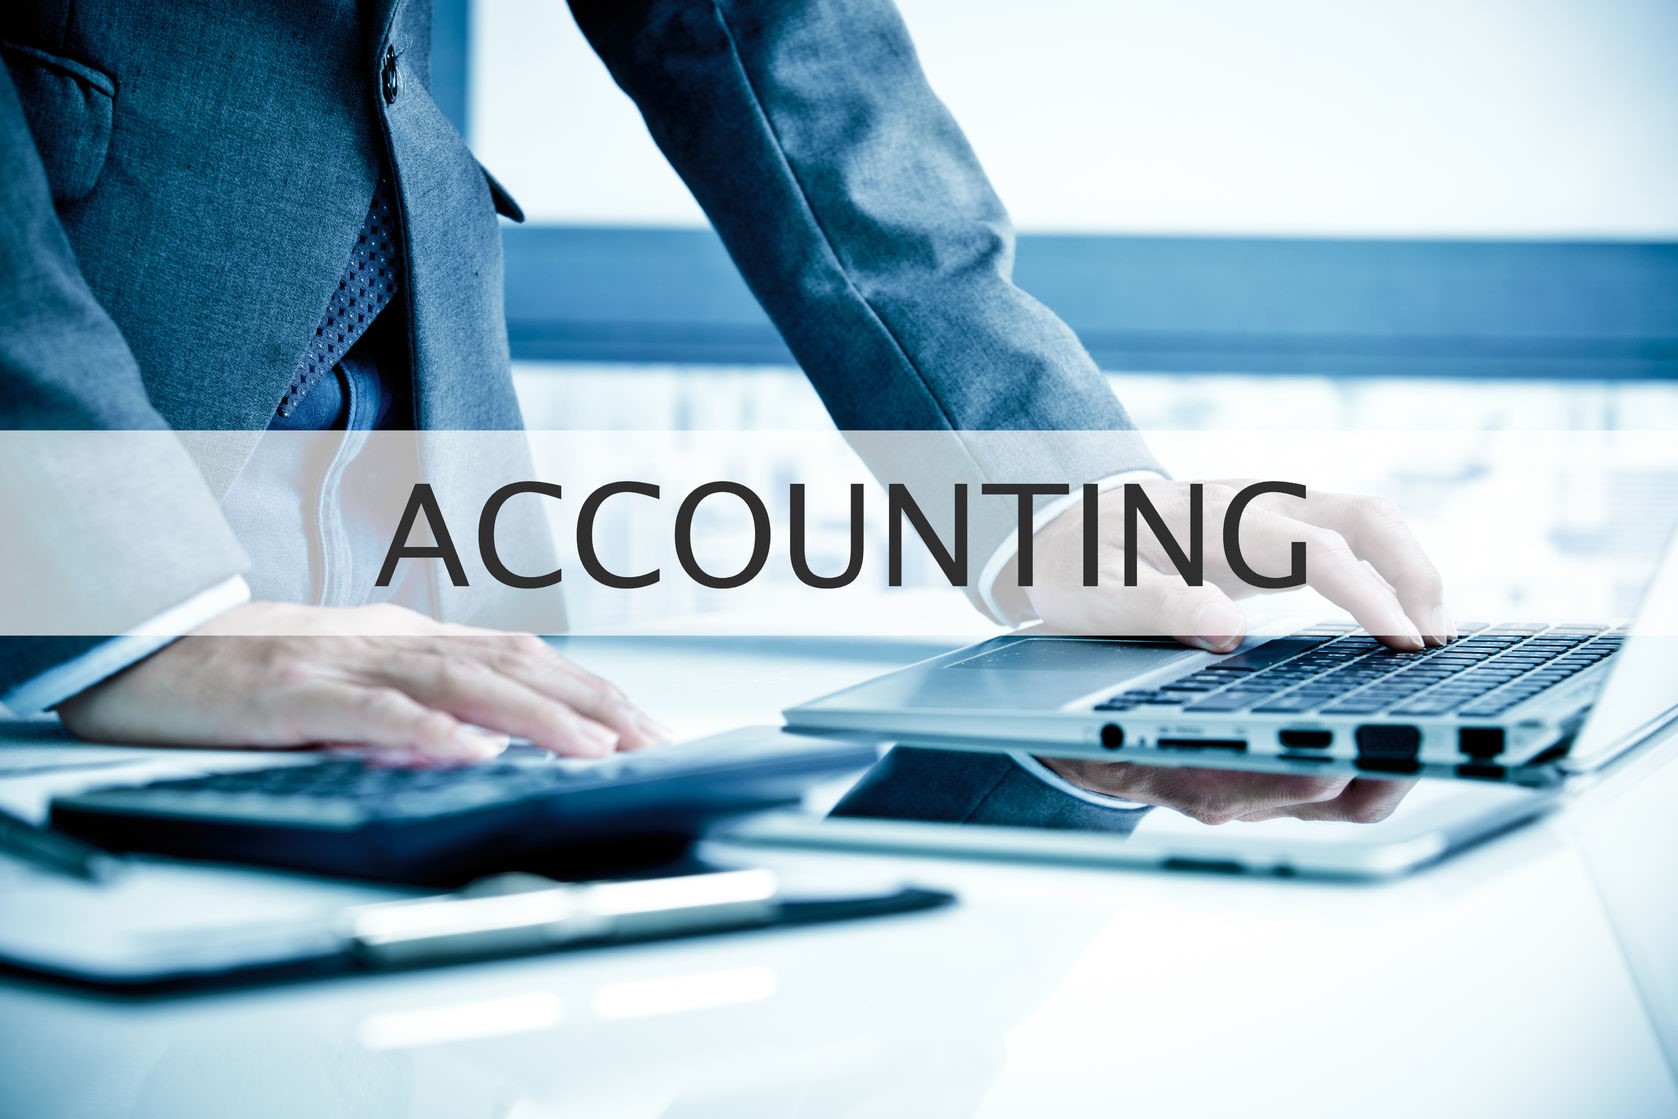 21 Ways an Accountant Can Help a Small Business Owner